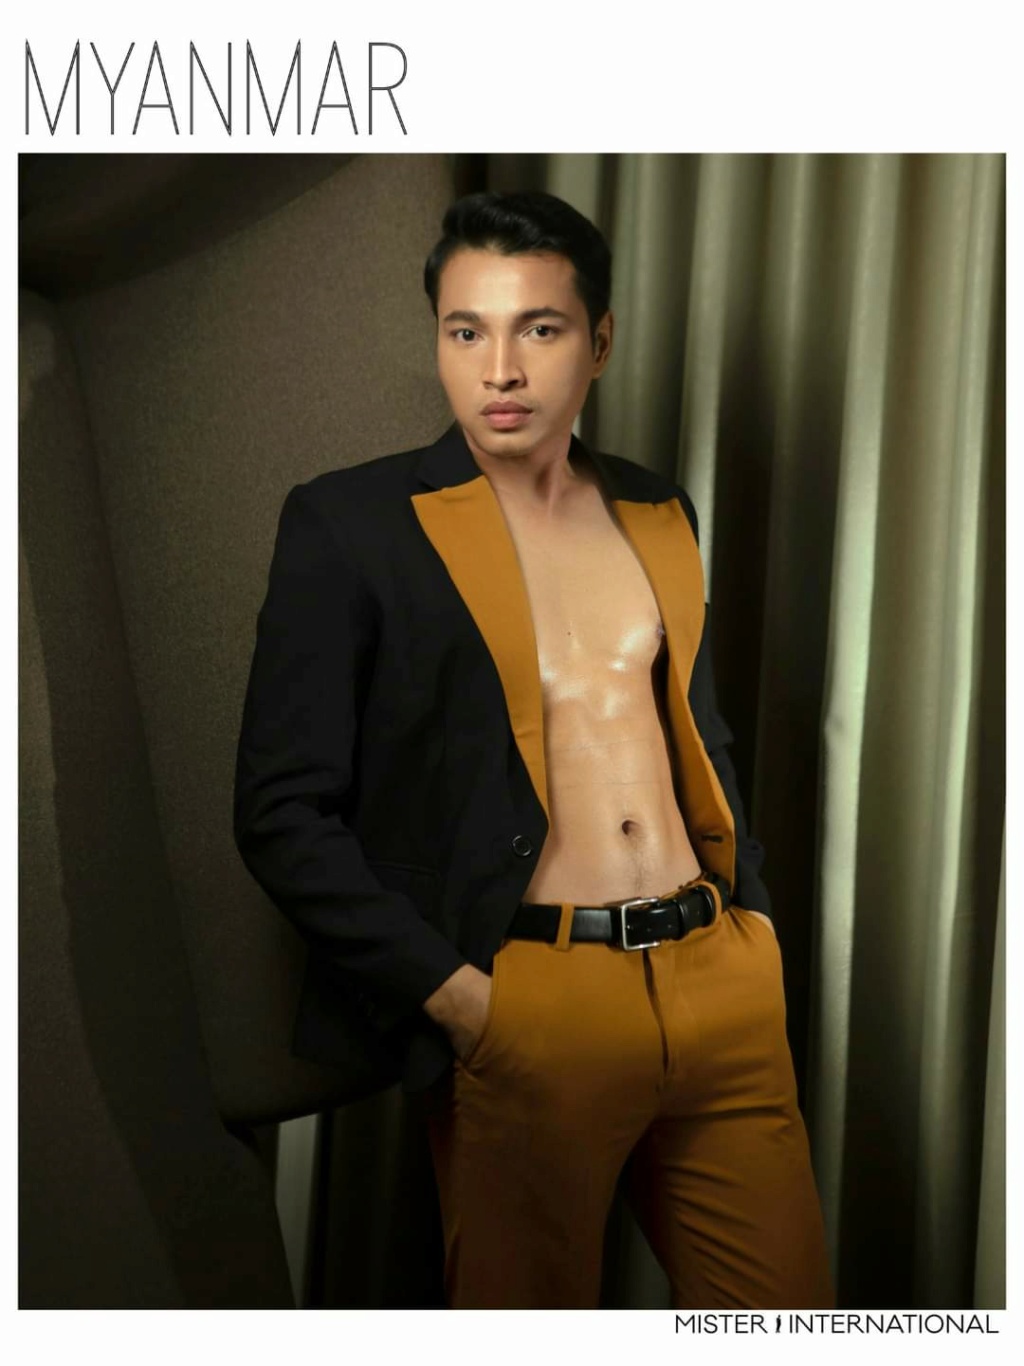 14th Mister International in Manila, Philippines - Oct 30th, 2022 - Winner is Dominican Republic - Page 4 Fb_i1124